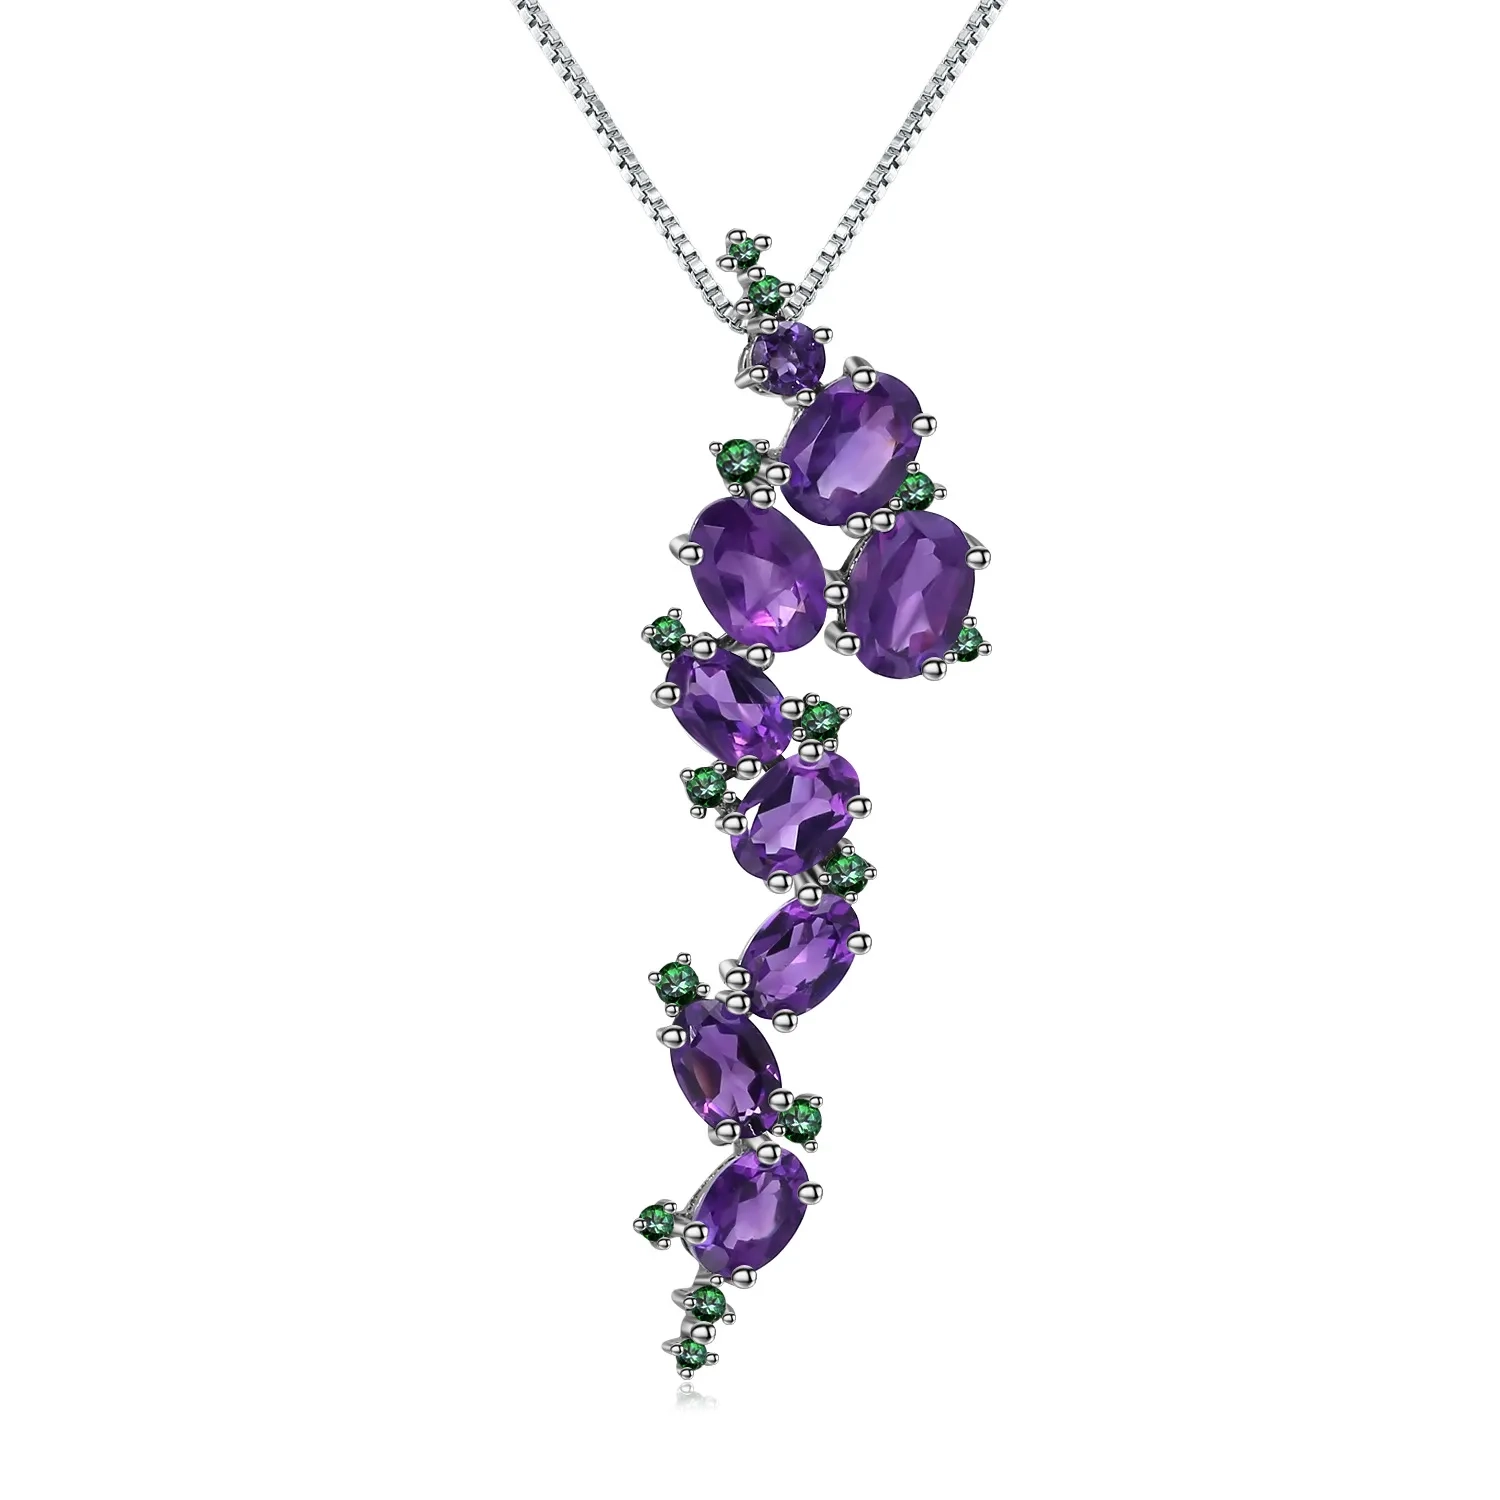 French Riviera touch pendant necklace with amethyst birthstone - main